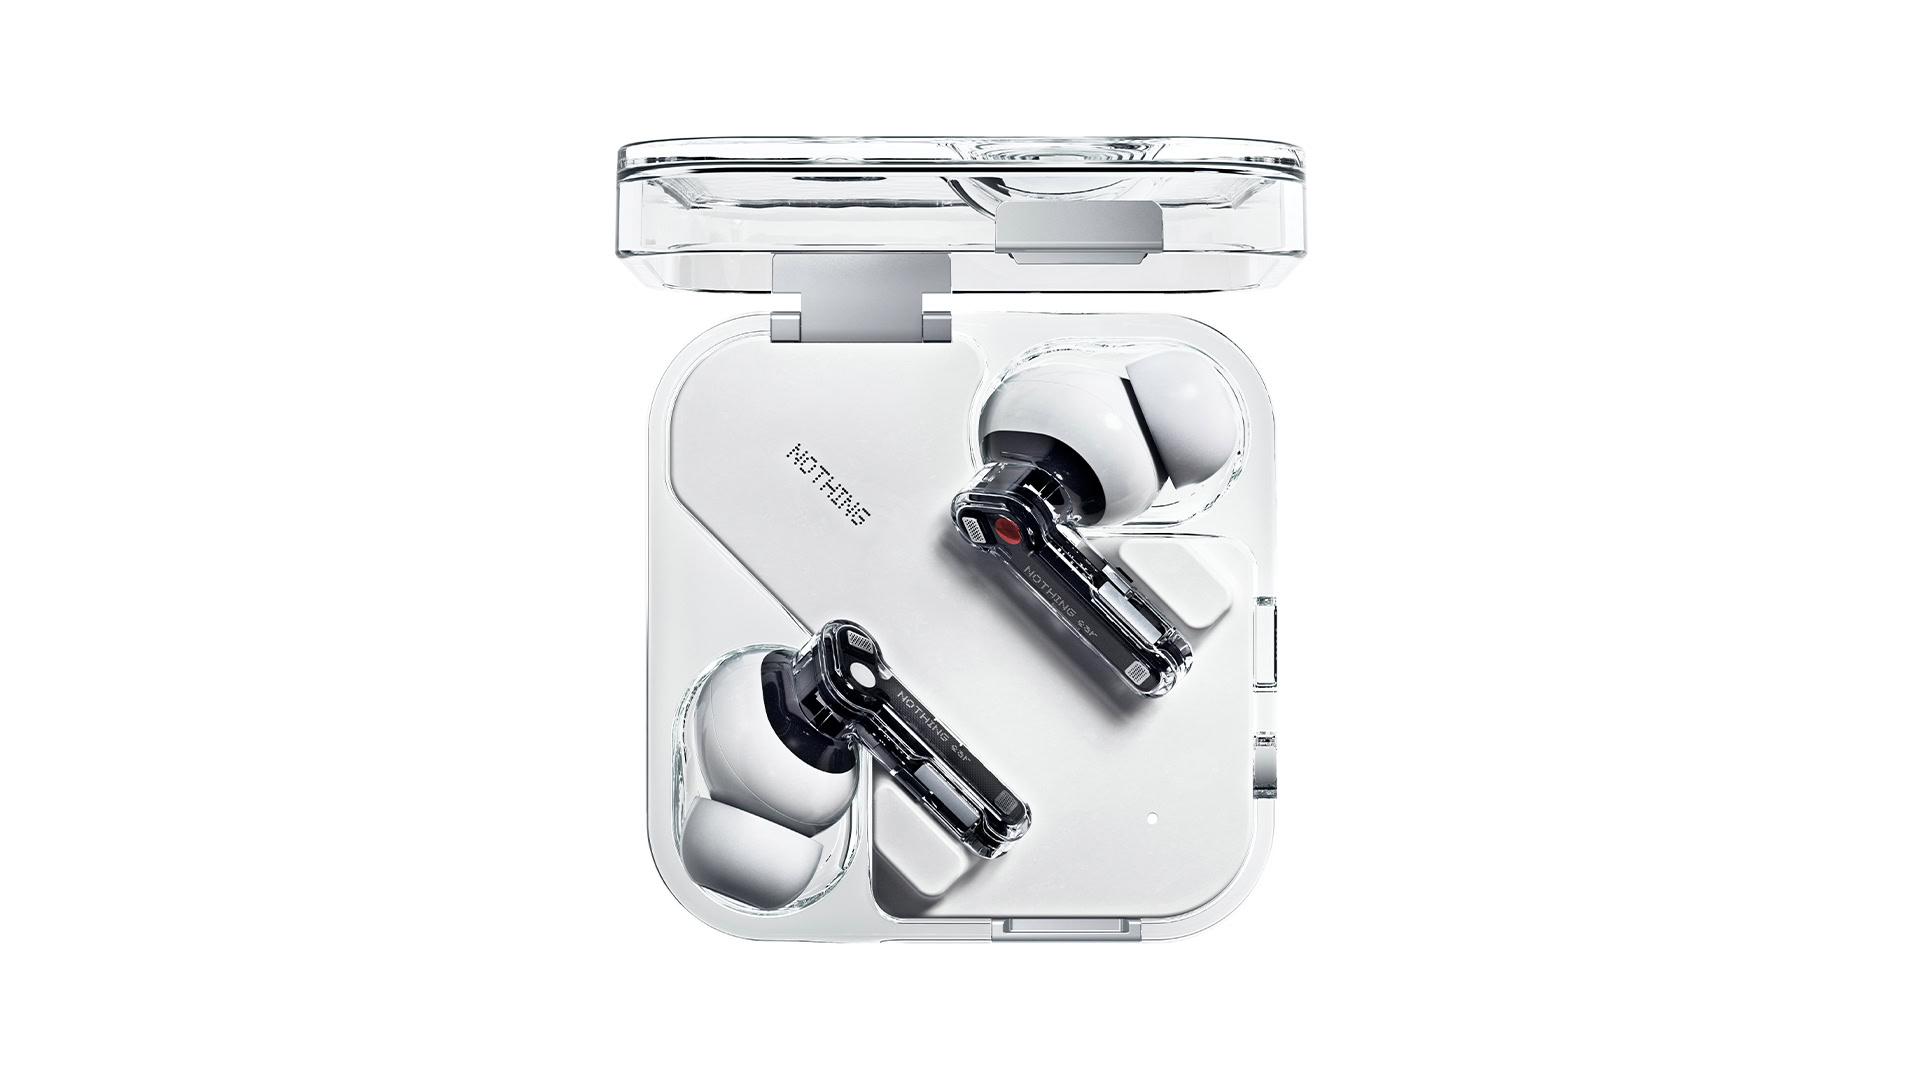 A manufacturer's photo of the Nothing Ear in its charging case, shown here in white.